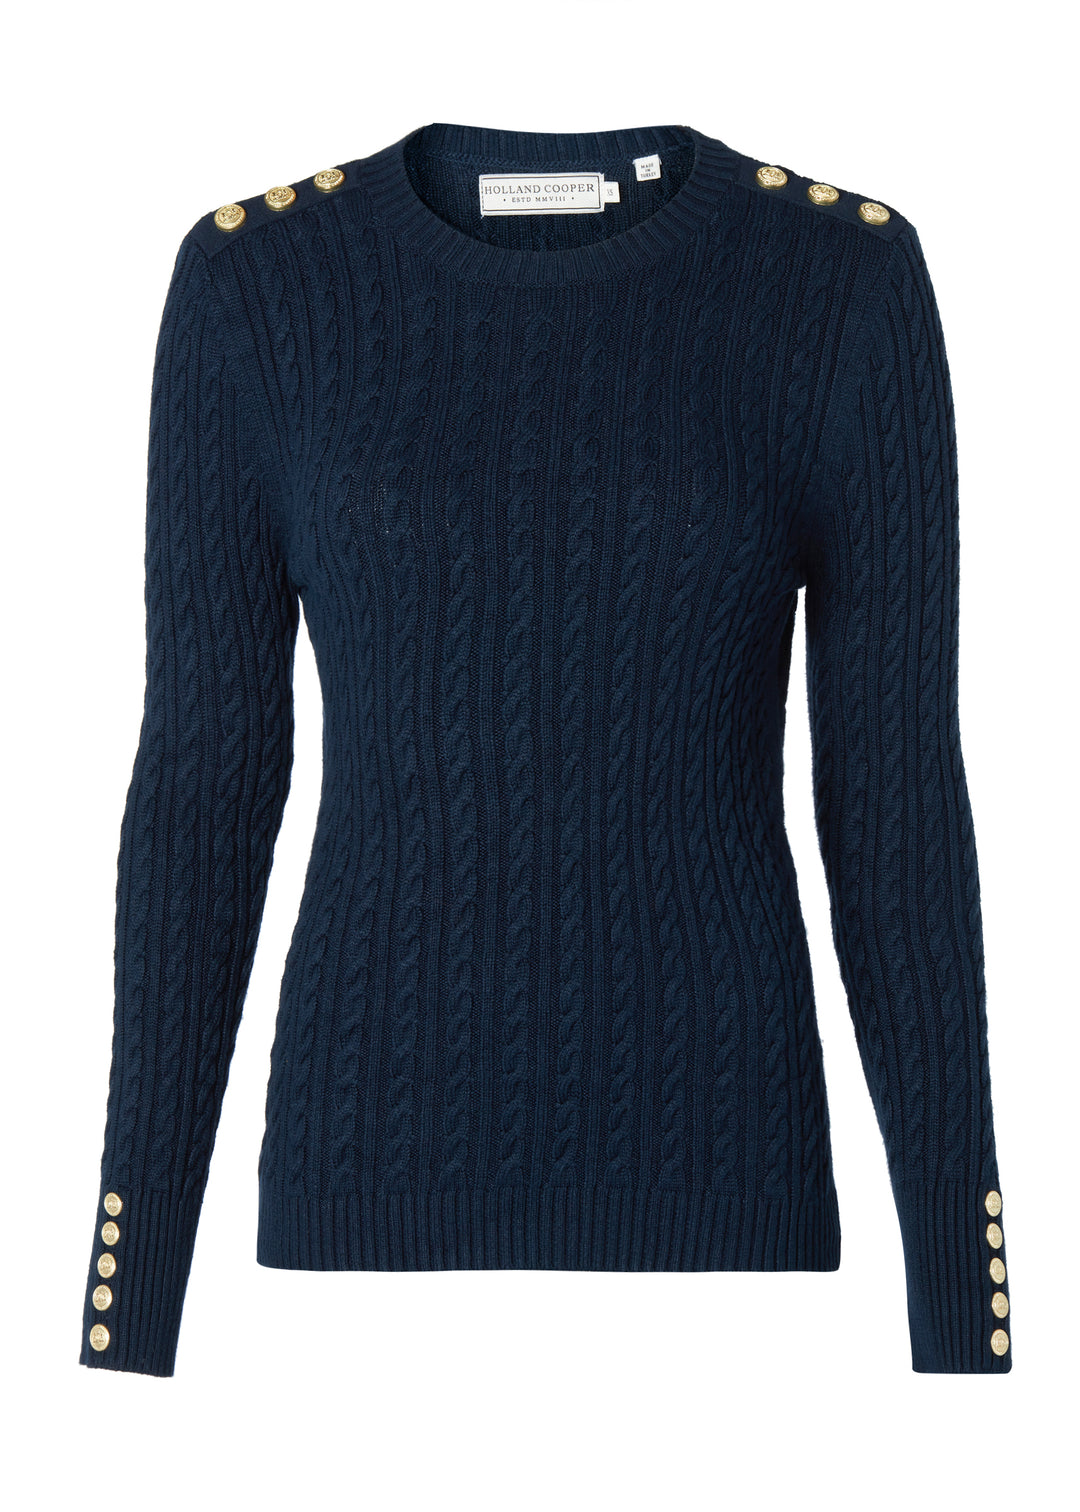 Seattle Cable Crew Knit (Ink Navy) – Holland Cooper